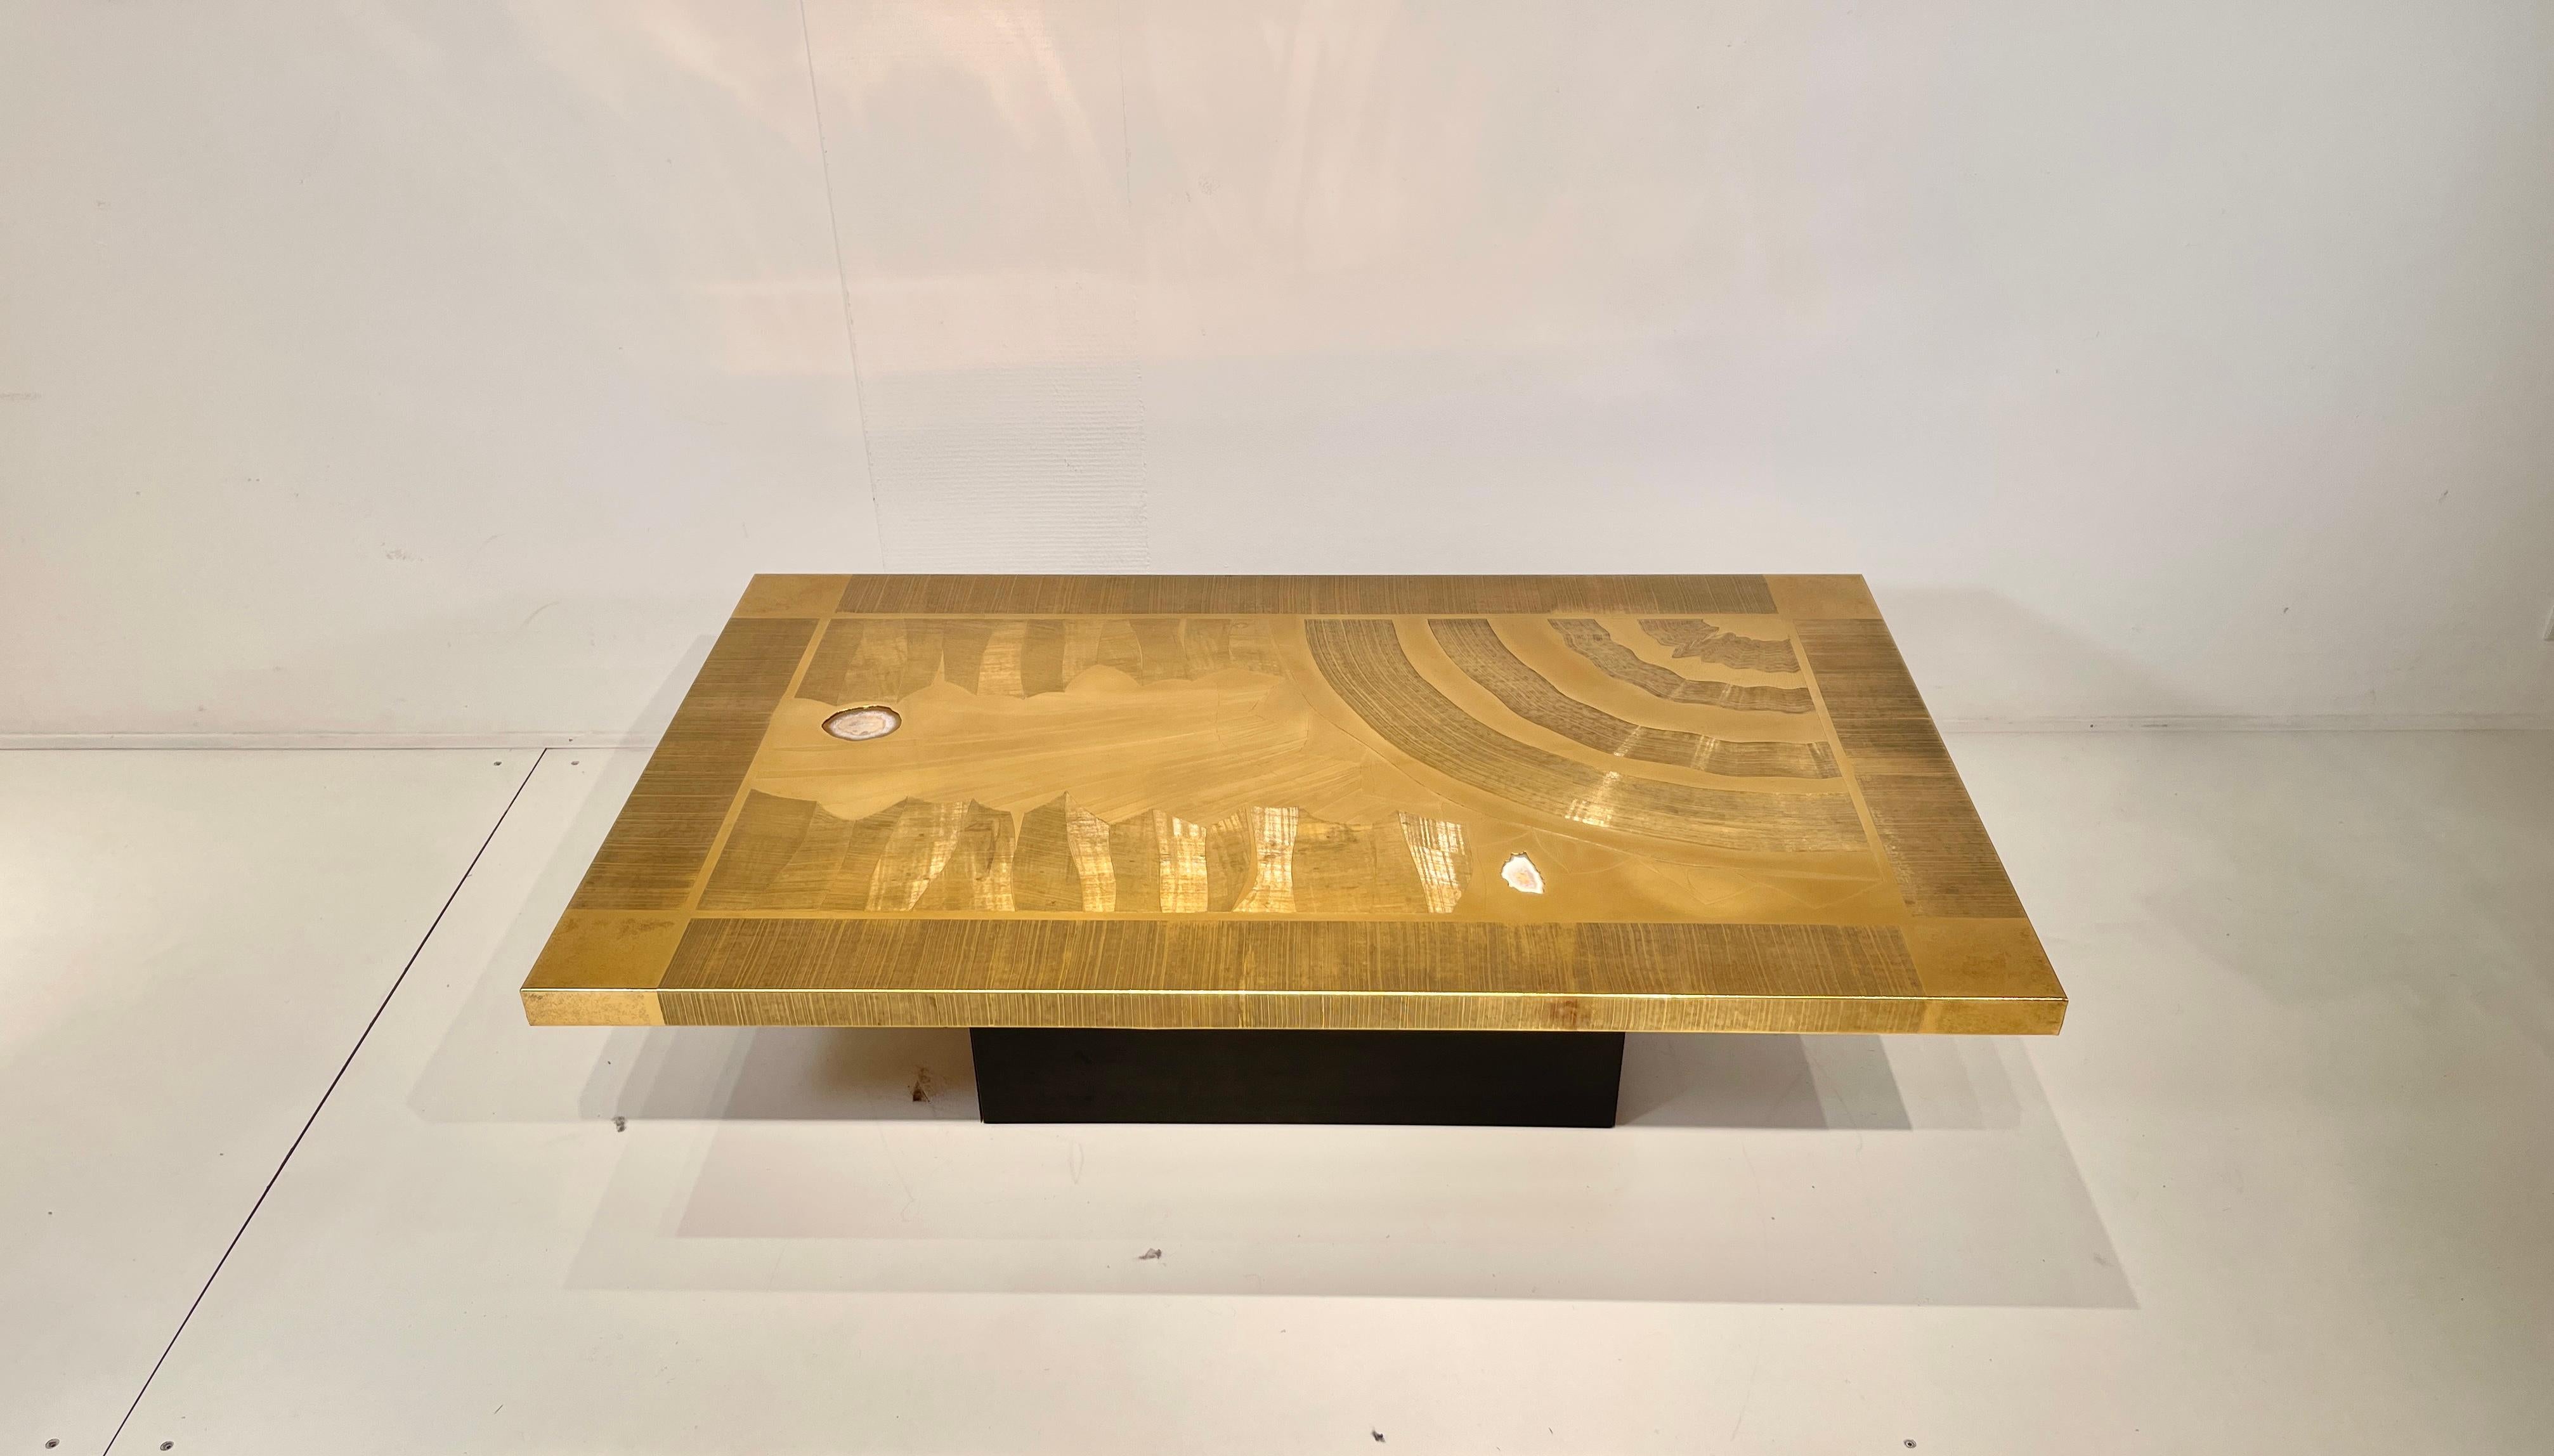 Engraved etched brass coffee table designed by Christian Krekels in 1977s, with 2 agates stone top. This furniture has a New refresh, new varnish and polish.
Signed, dated and numbered by the Artist.